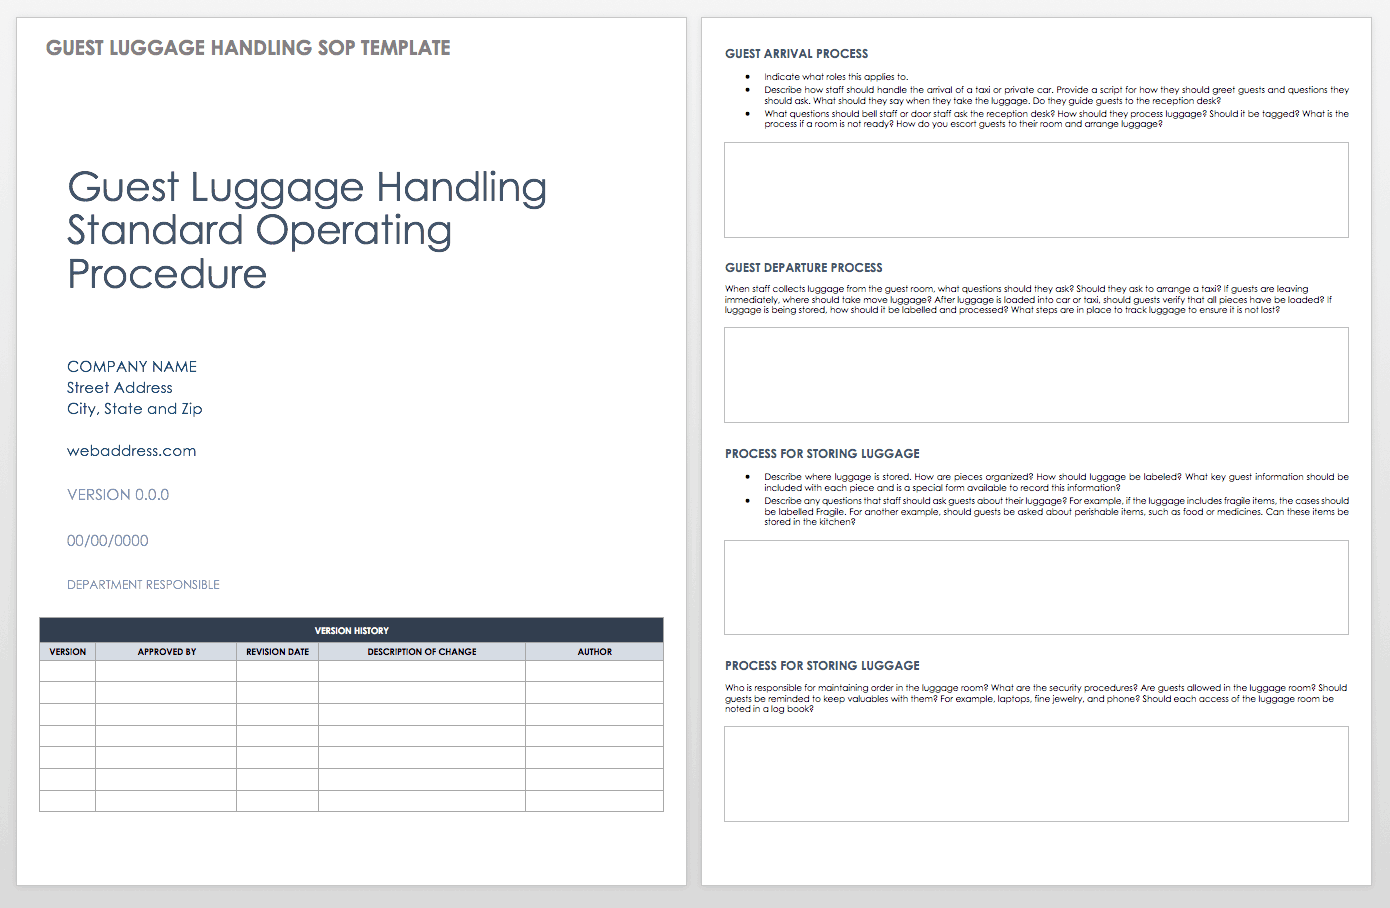 Guest Luggage Standard Operating Procedure Template